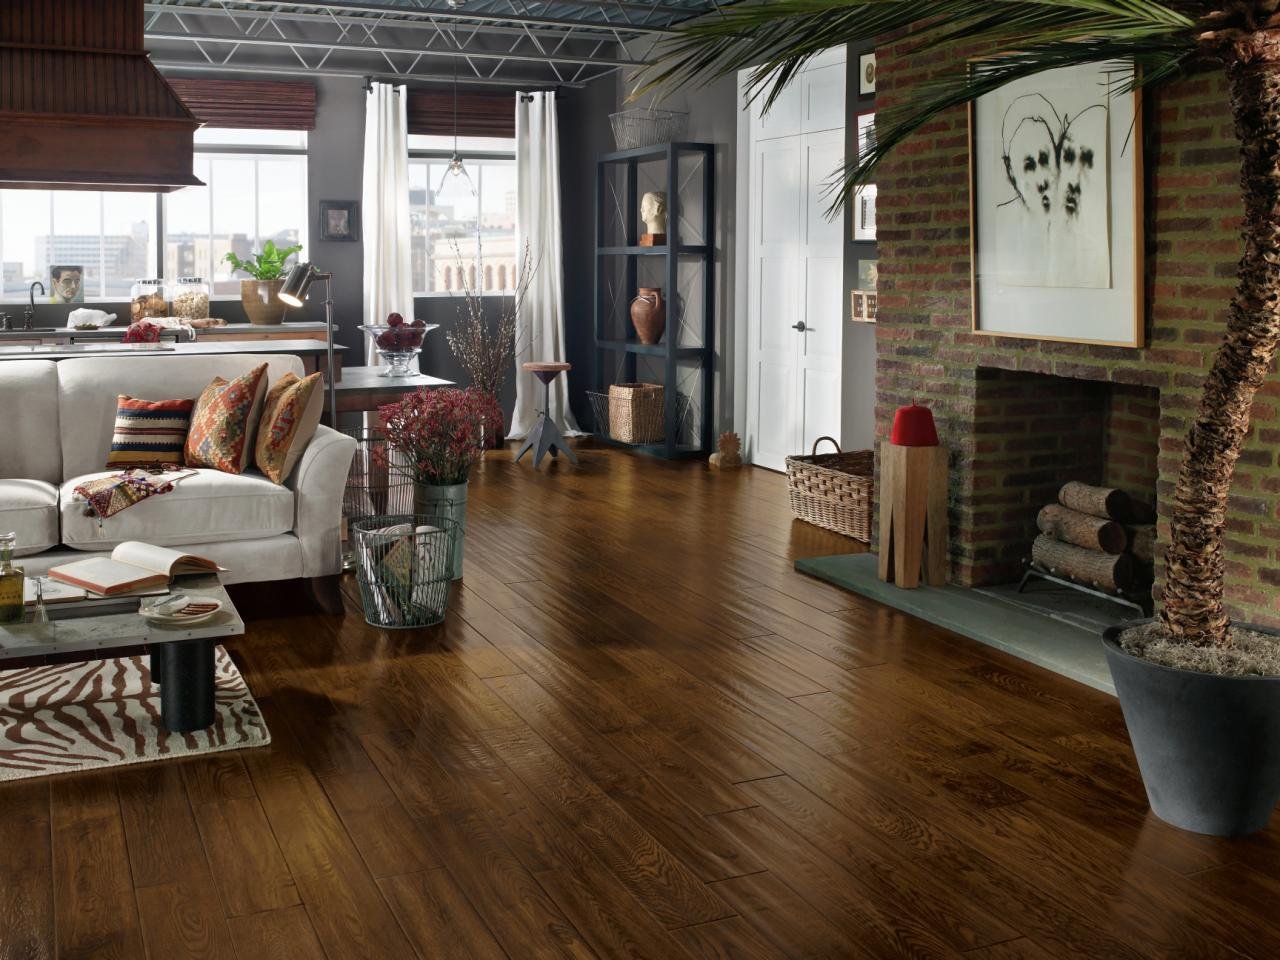 Top 94+ Awe-inspiring Living Room Color Ideas With Hardwood Floors Trend Of The Year